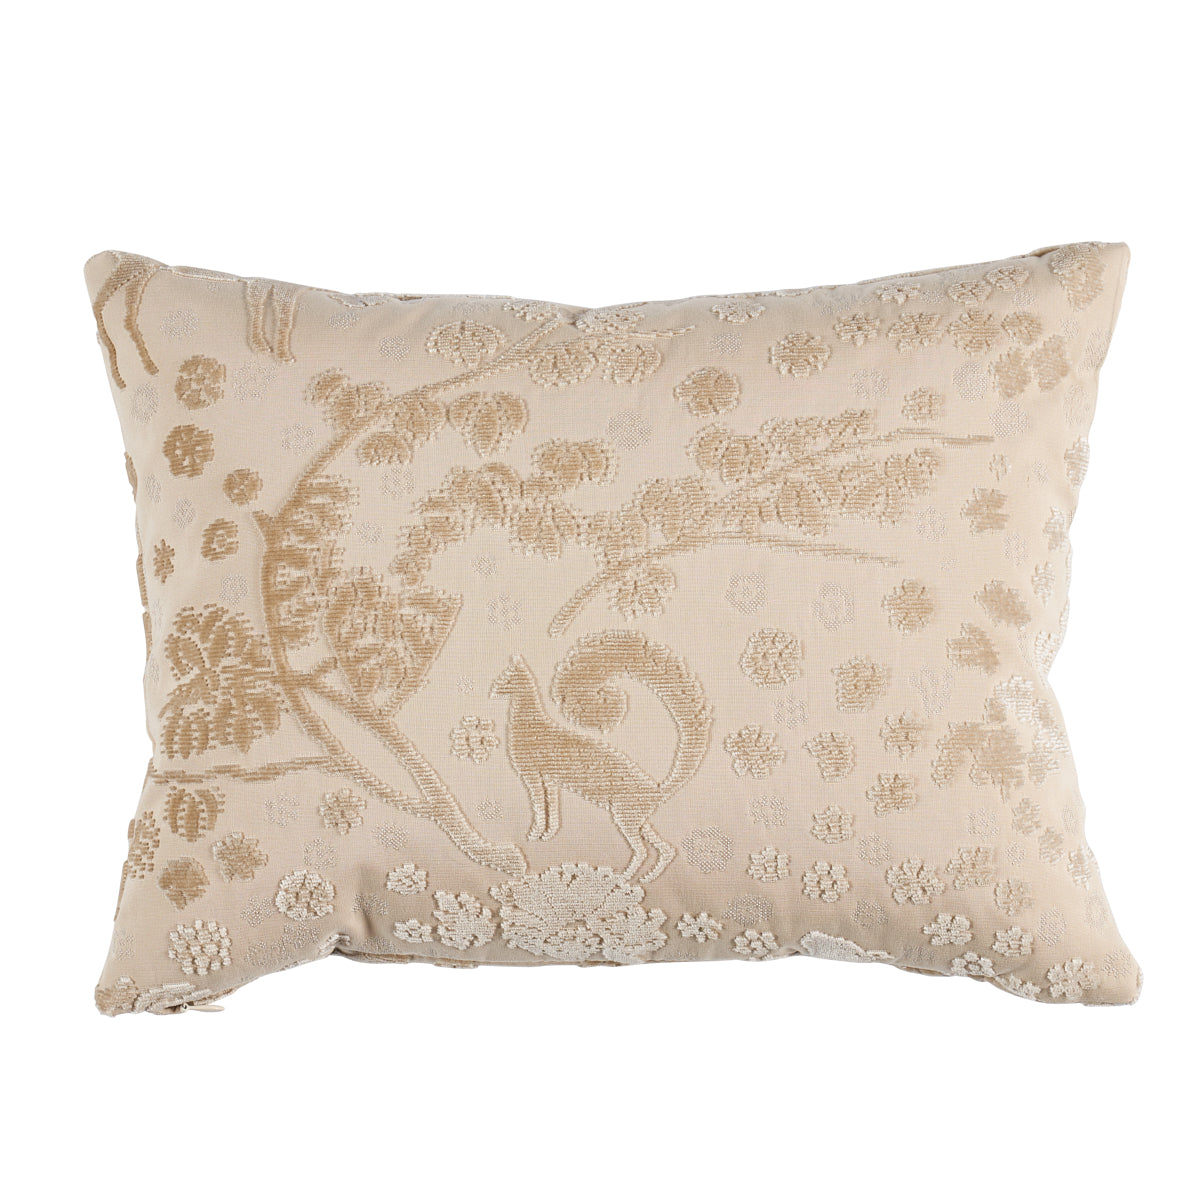 Purchase So8131112 | Arbor Forest Pillow, Champagne - Schumacher Pillows